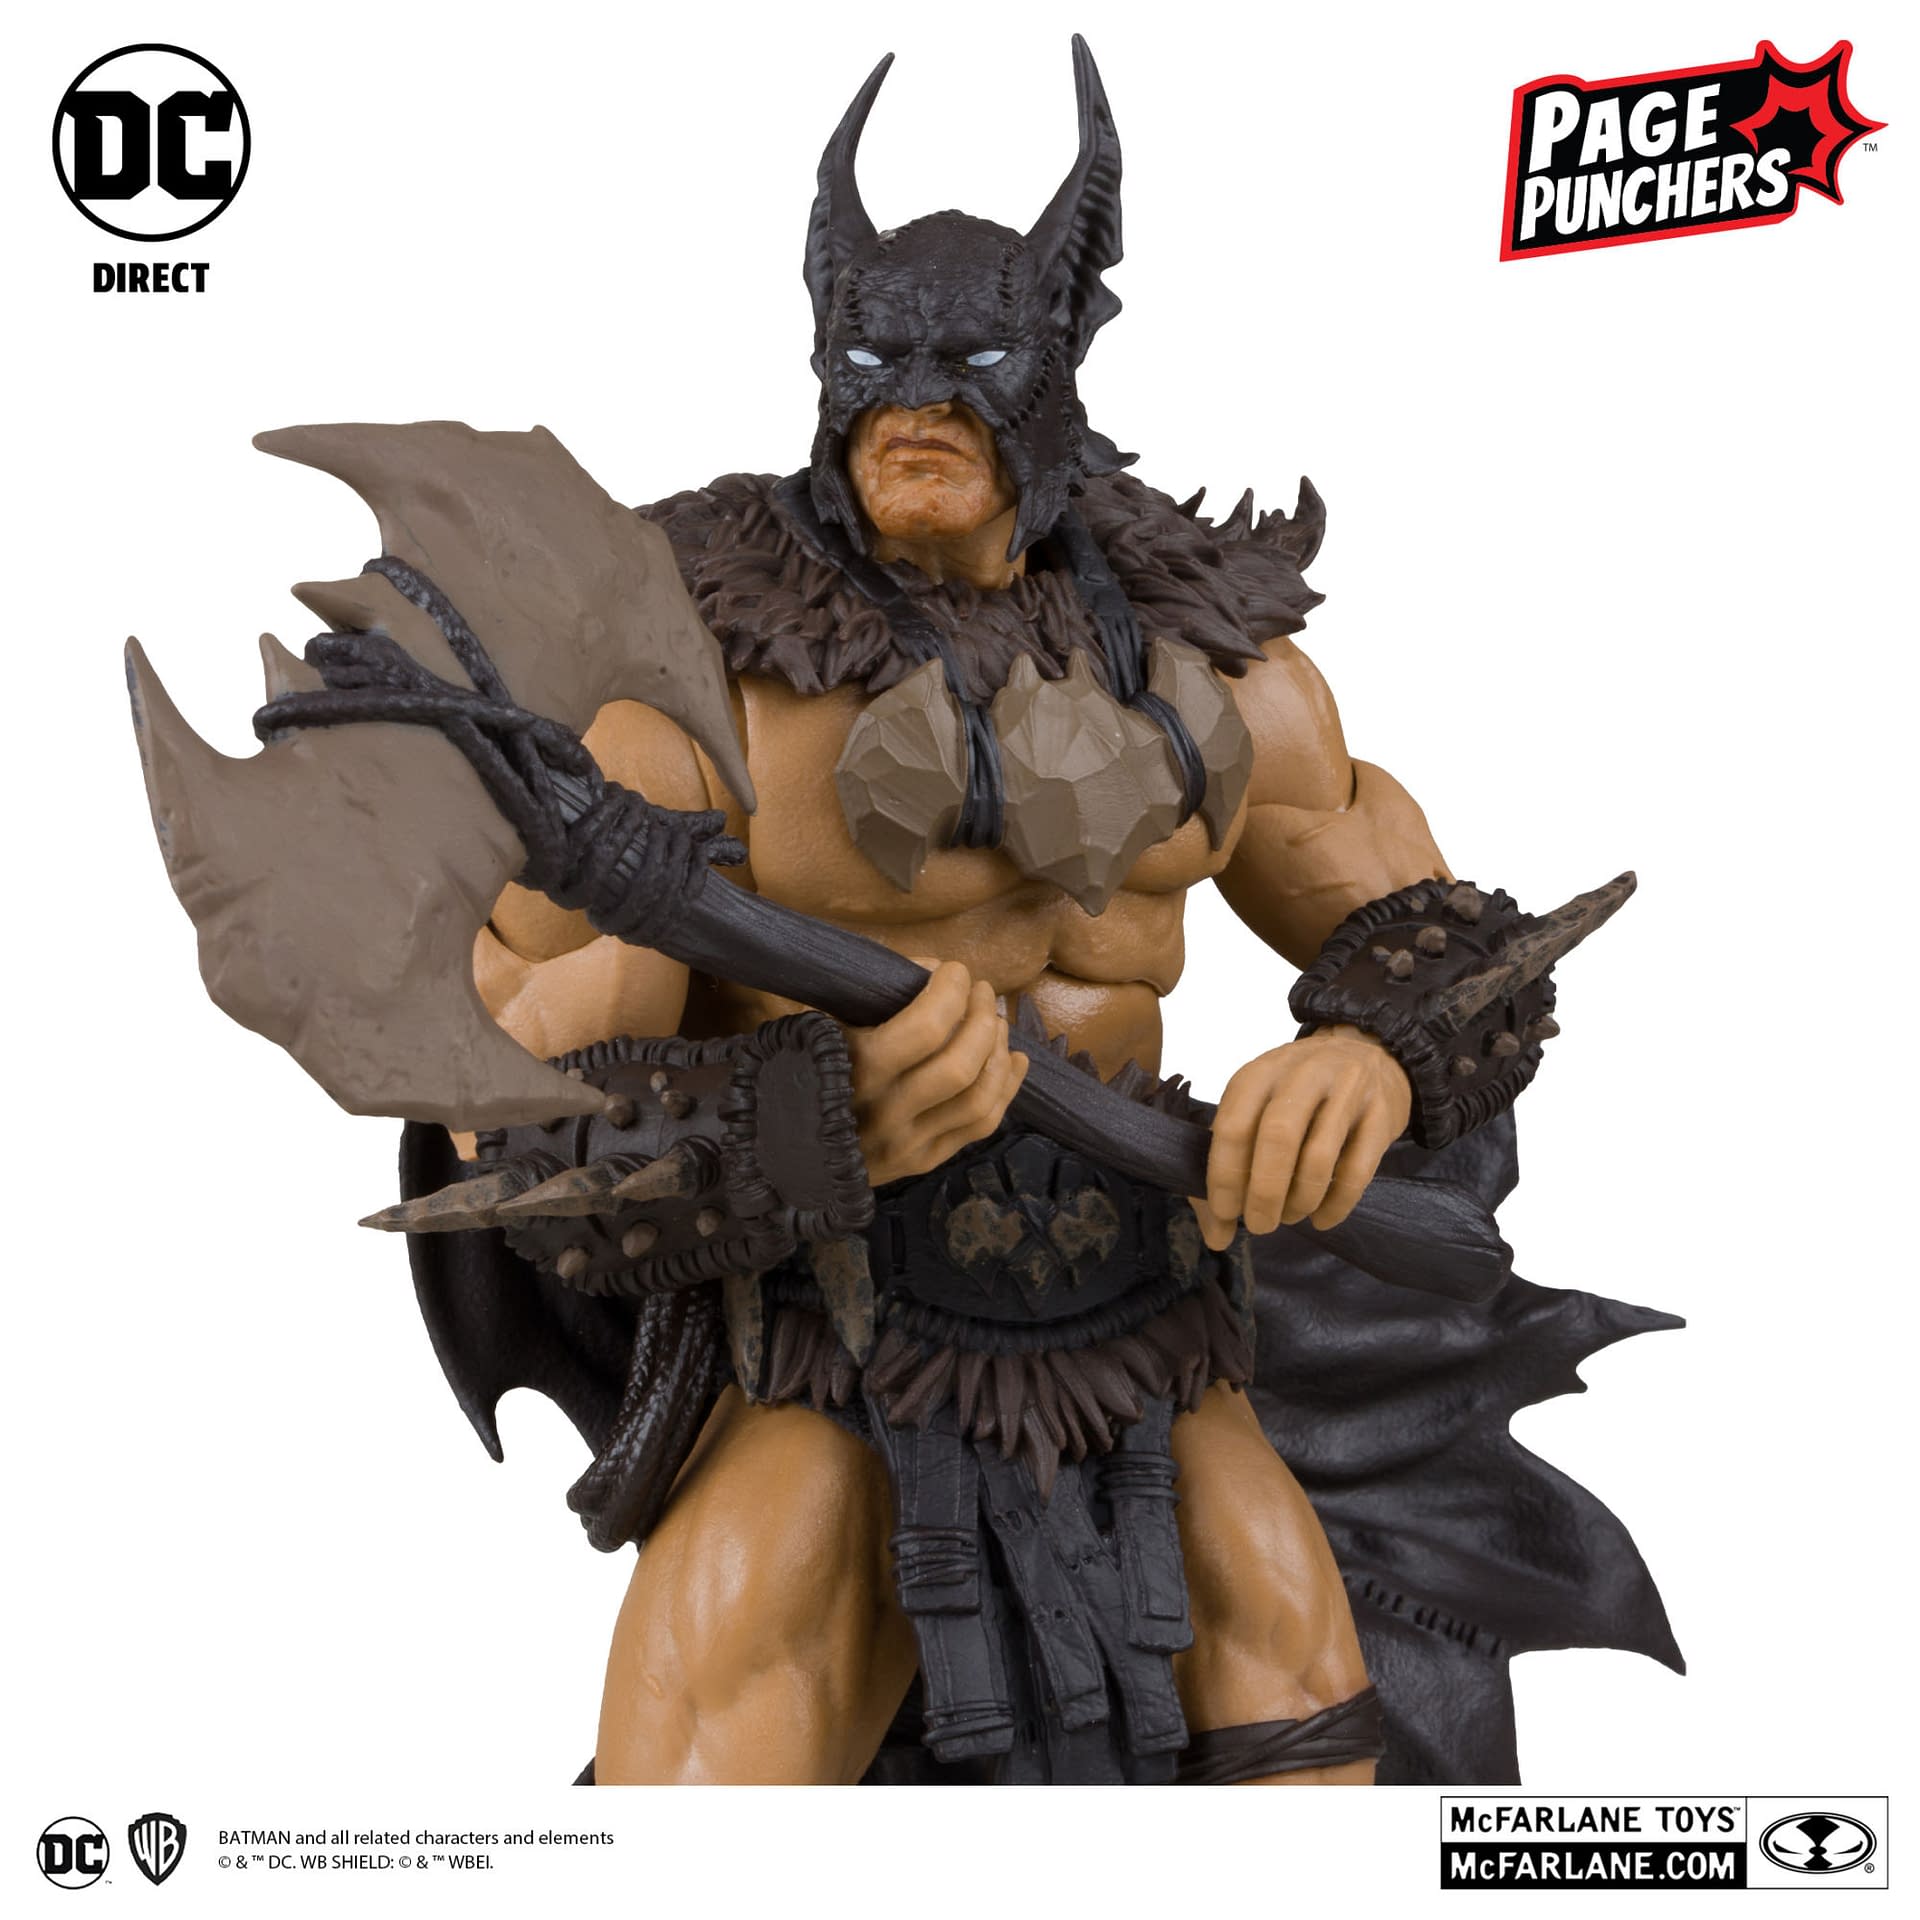 Batman of the Bat-Clan Fights the Frozen with McFarlane Toys 